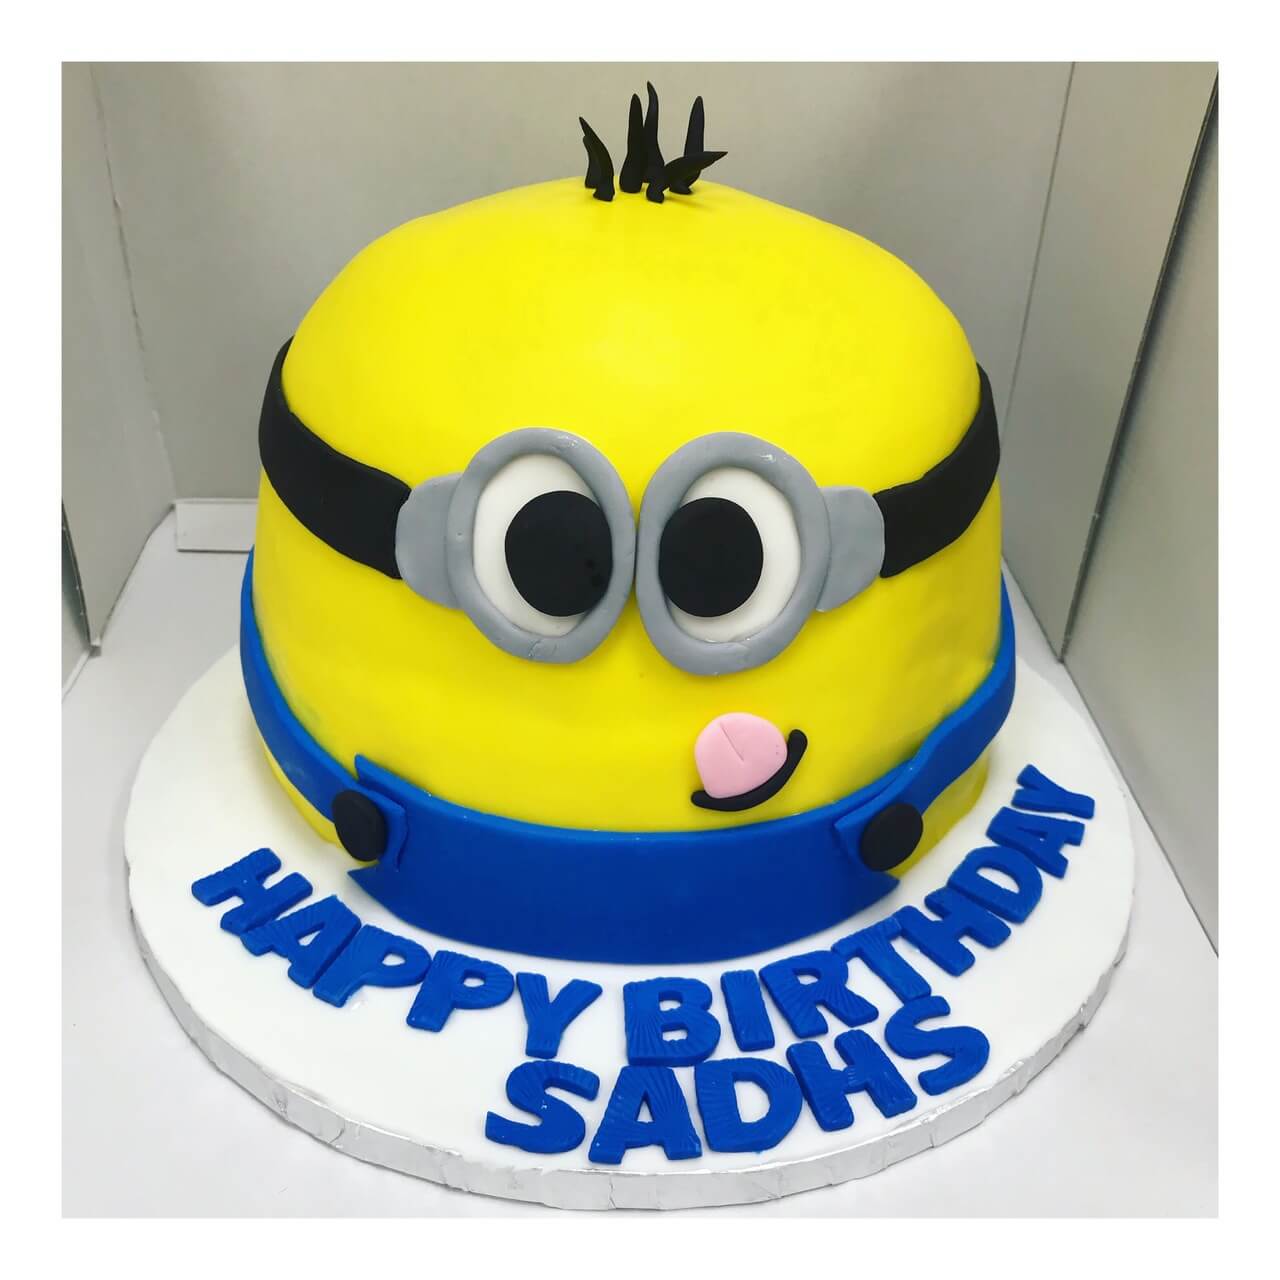 Best Cakes To Make Your Kids Birthday Special-thanhphatduhoc.com.vn